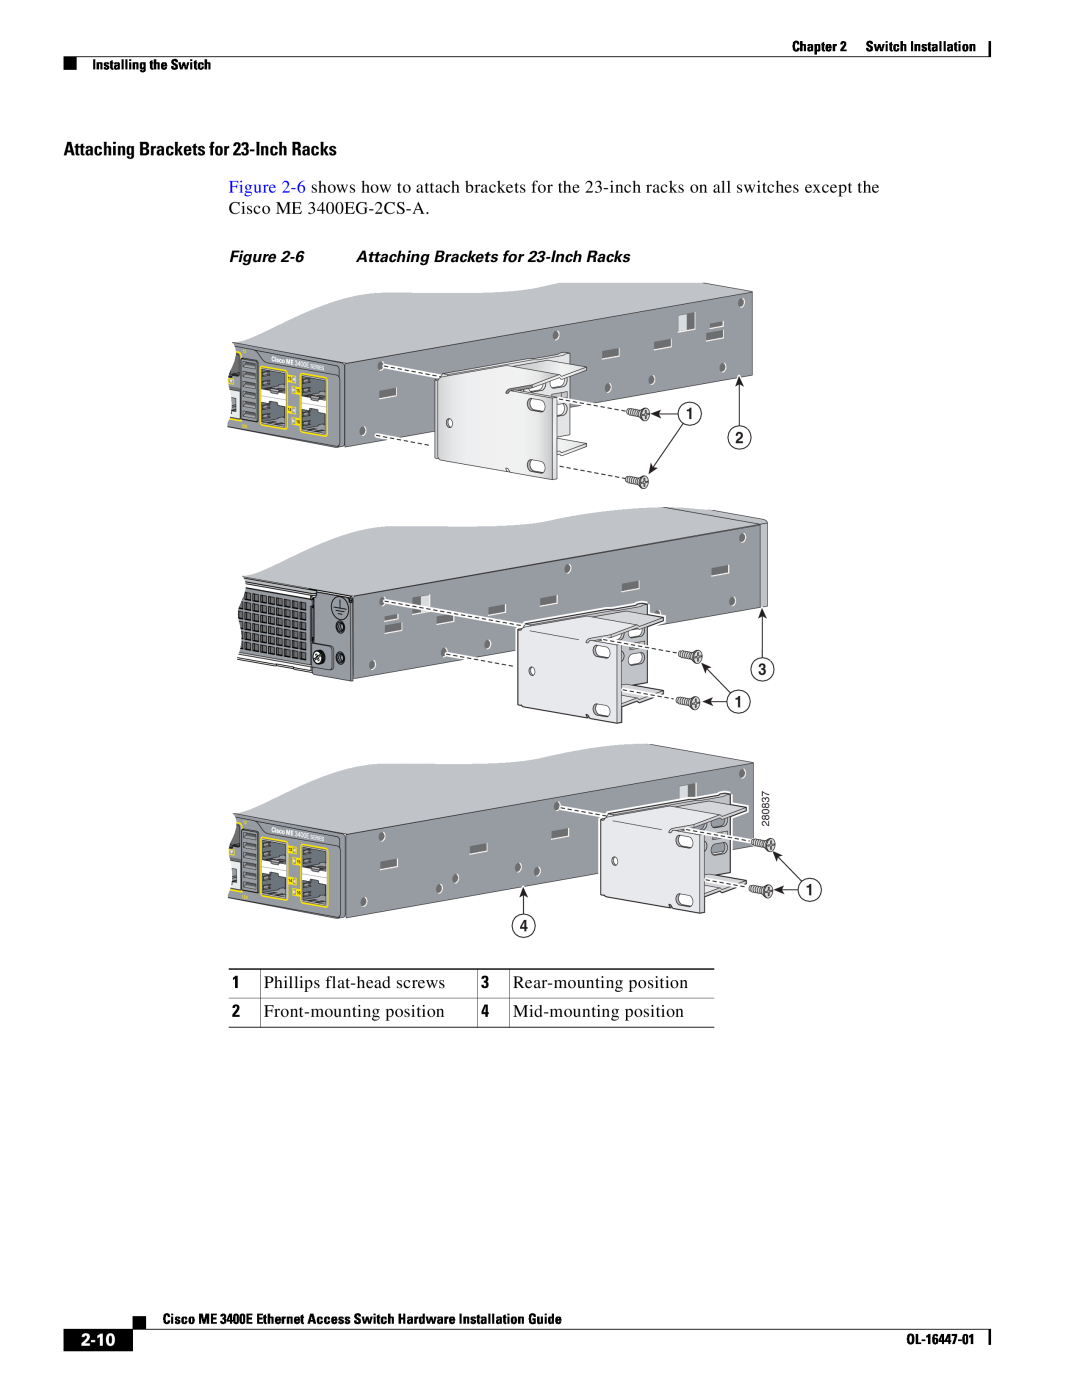 Cisco Systems OL-16447-01 manual 2-10, 6 Attaching Brackets for 23-Inch Racks 